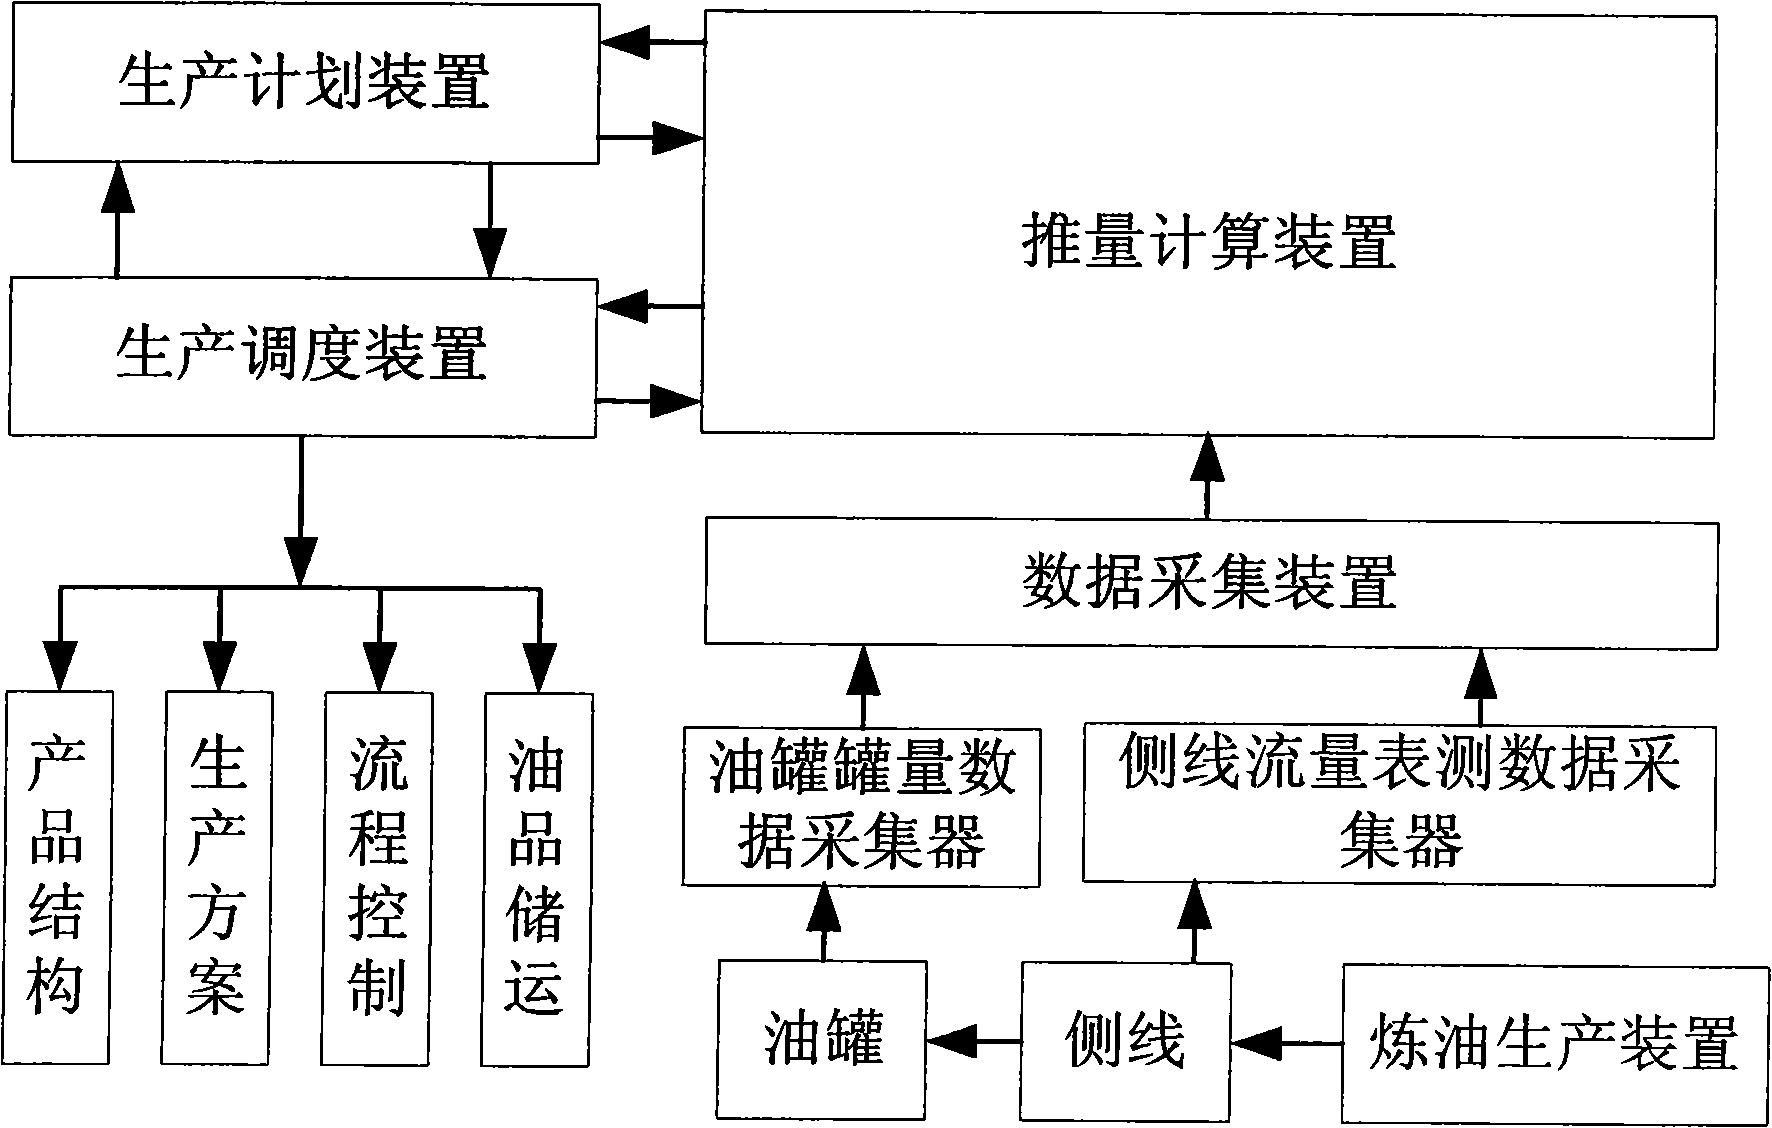 Oil-refining chemical production balancing system